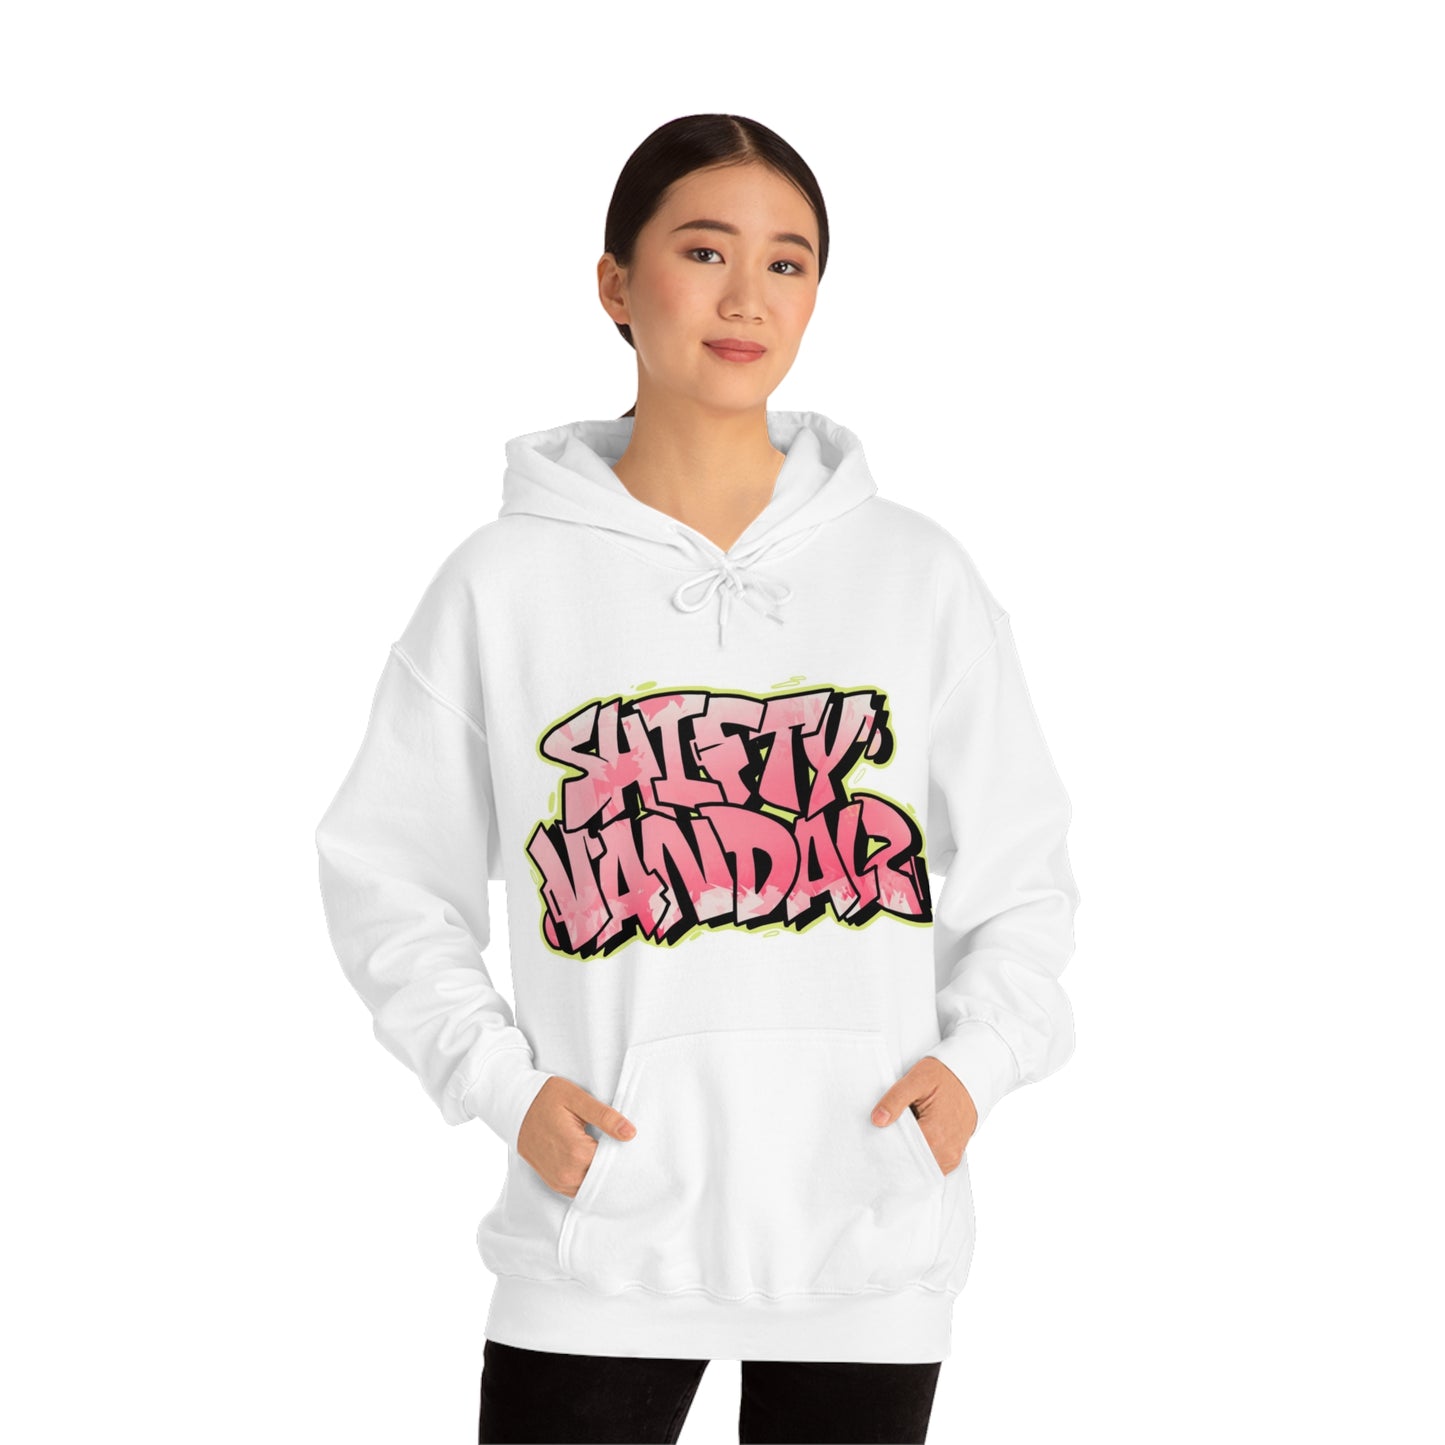 Official Shifty vandalz hoody(Images switched)